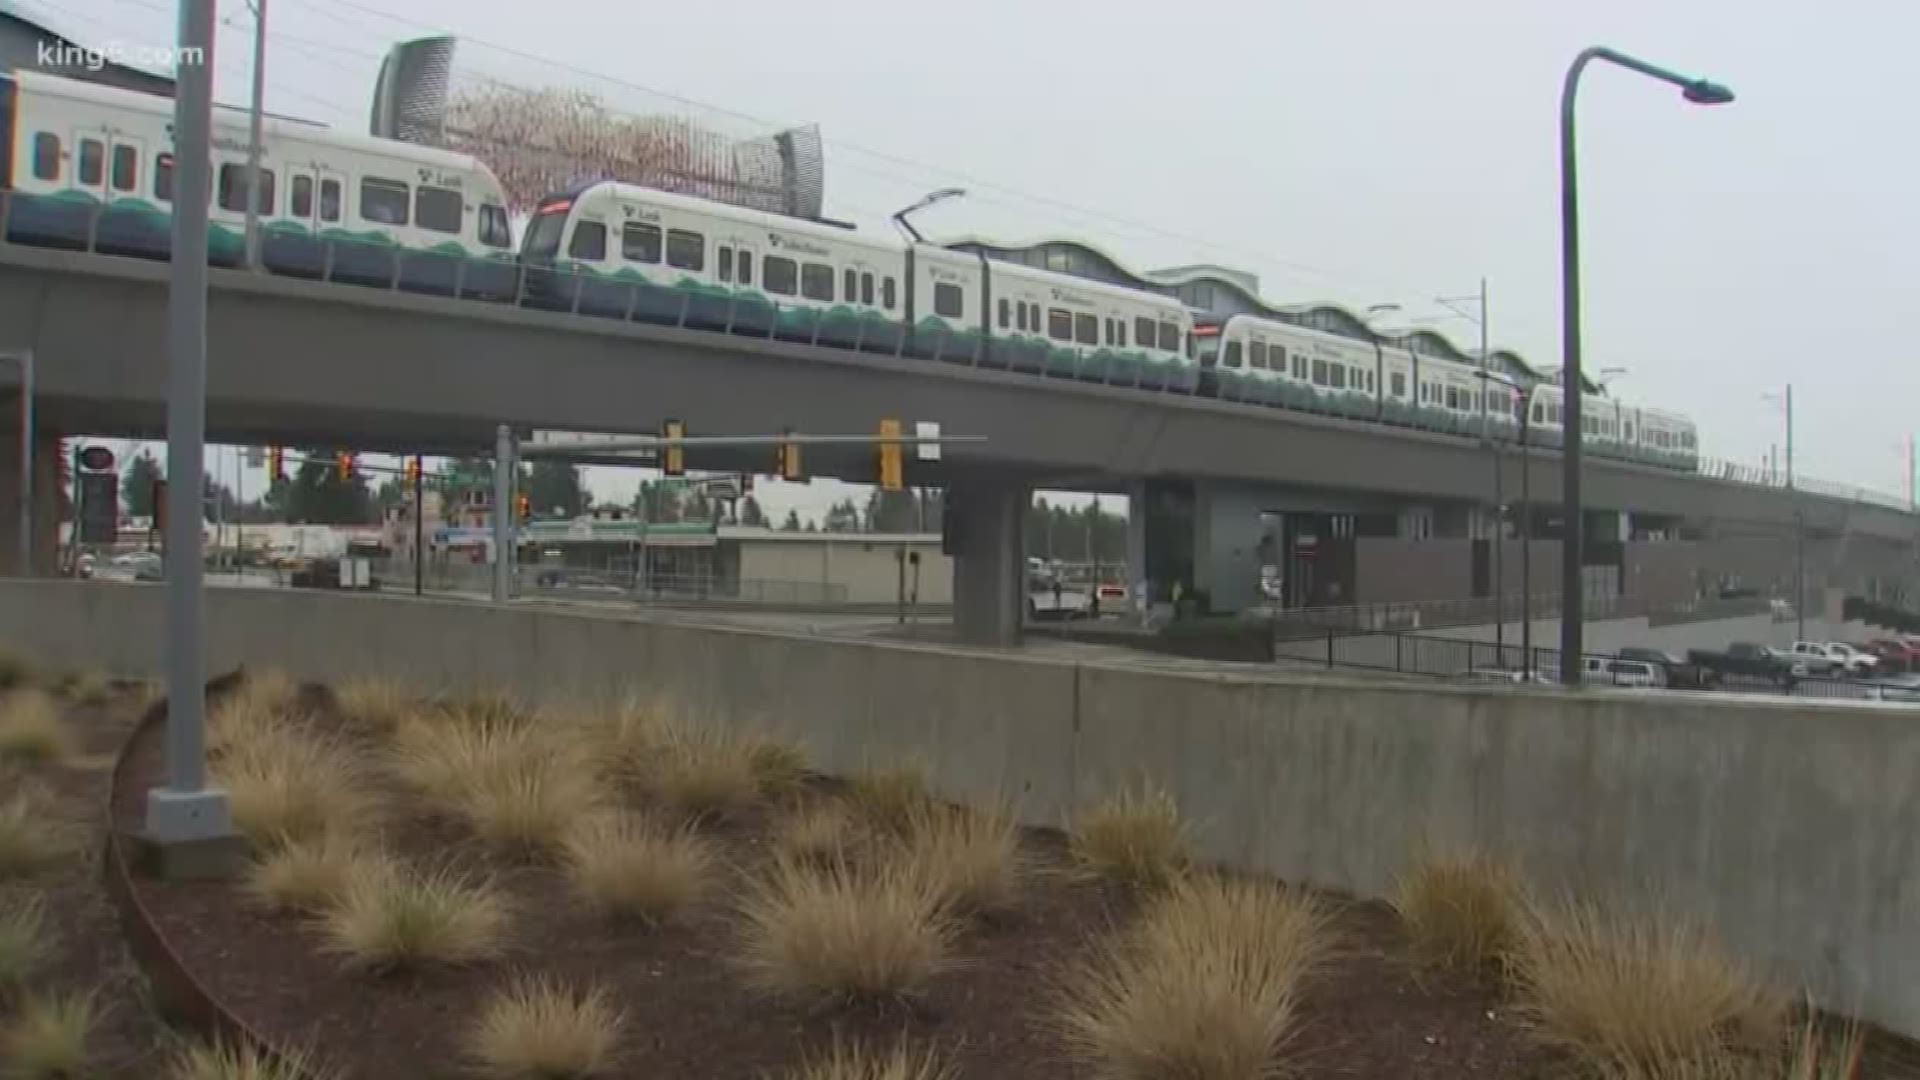 The Federal Way Link light rail expansion got a big boost thanks to a $790 million grant from the U.S. Department of Transportation.